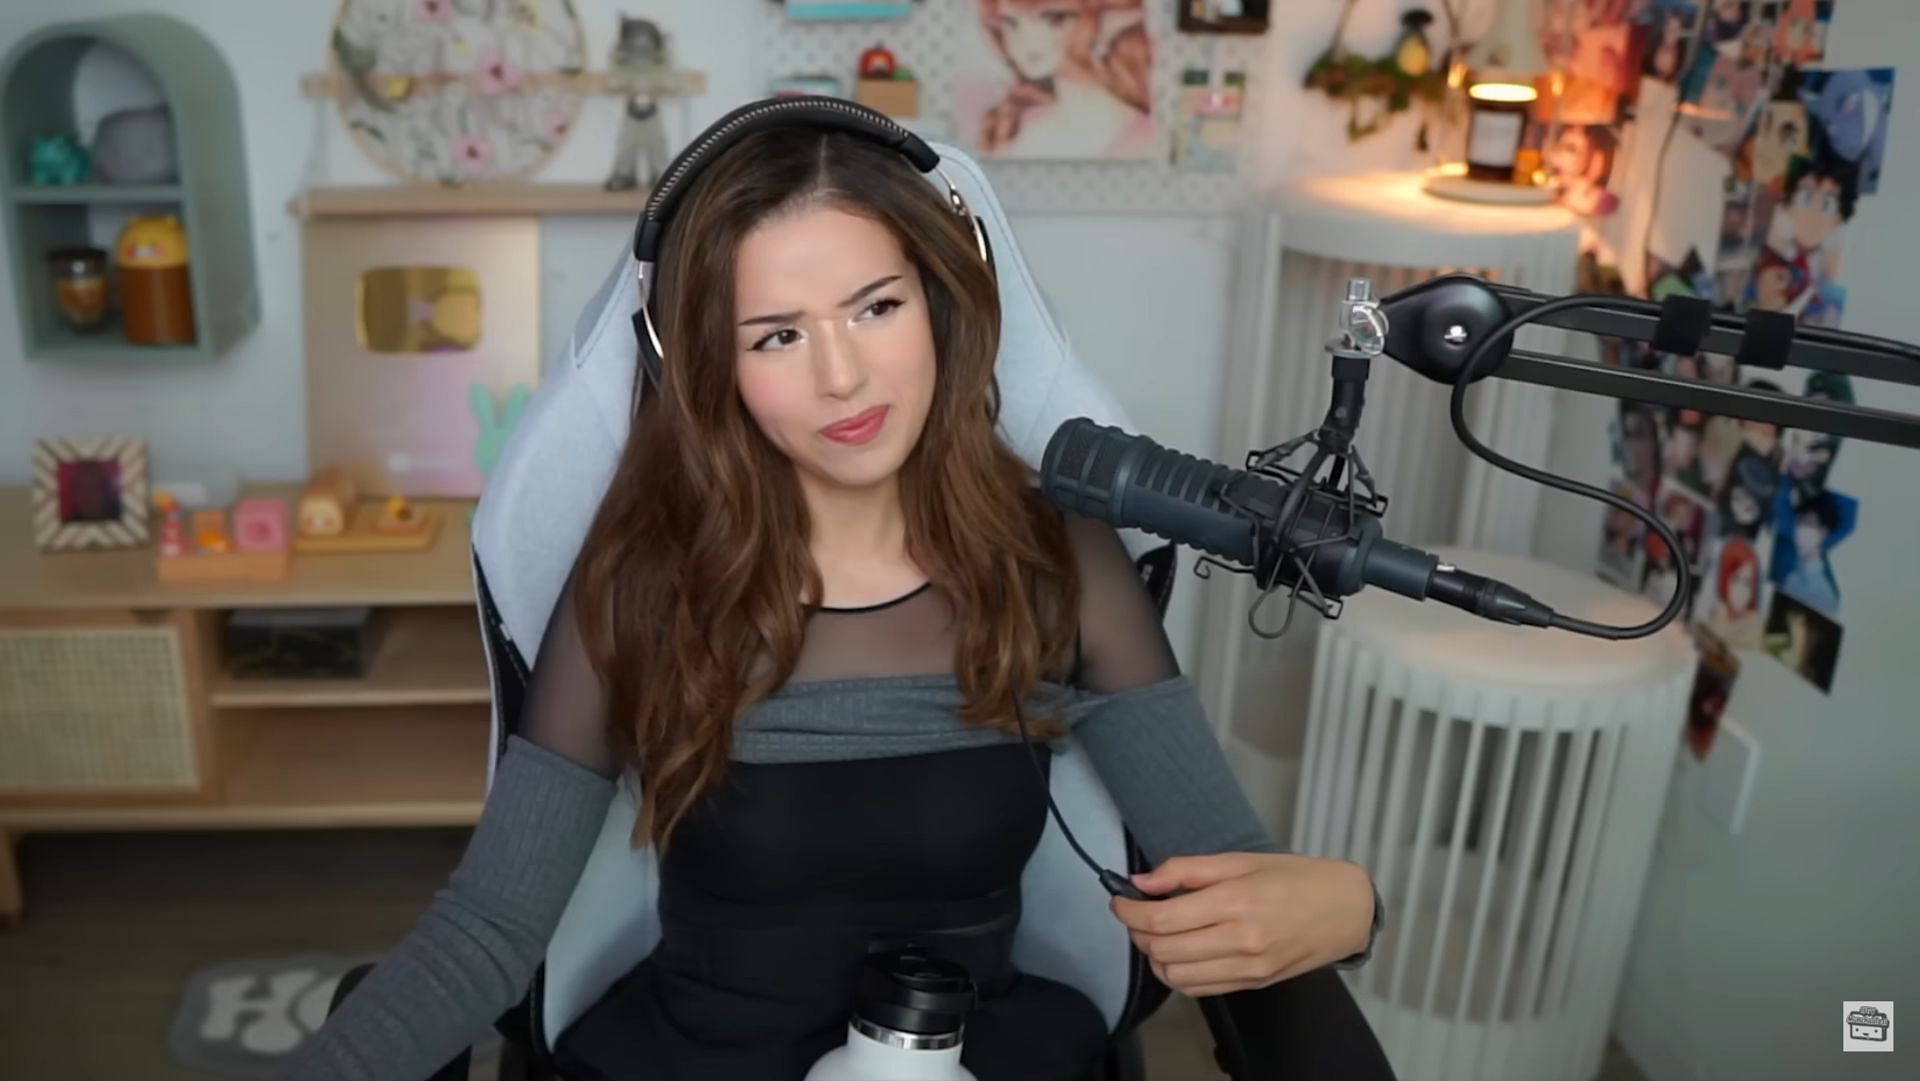 Pokimane slams viewers for asking whether she is pregnant (Image via Pokimane/Twitch)